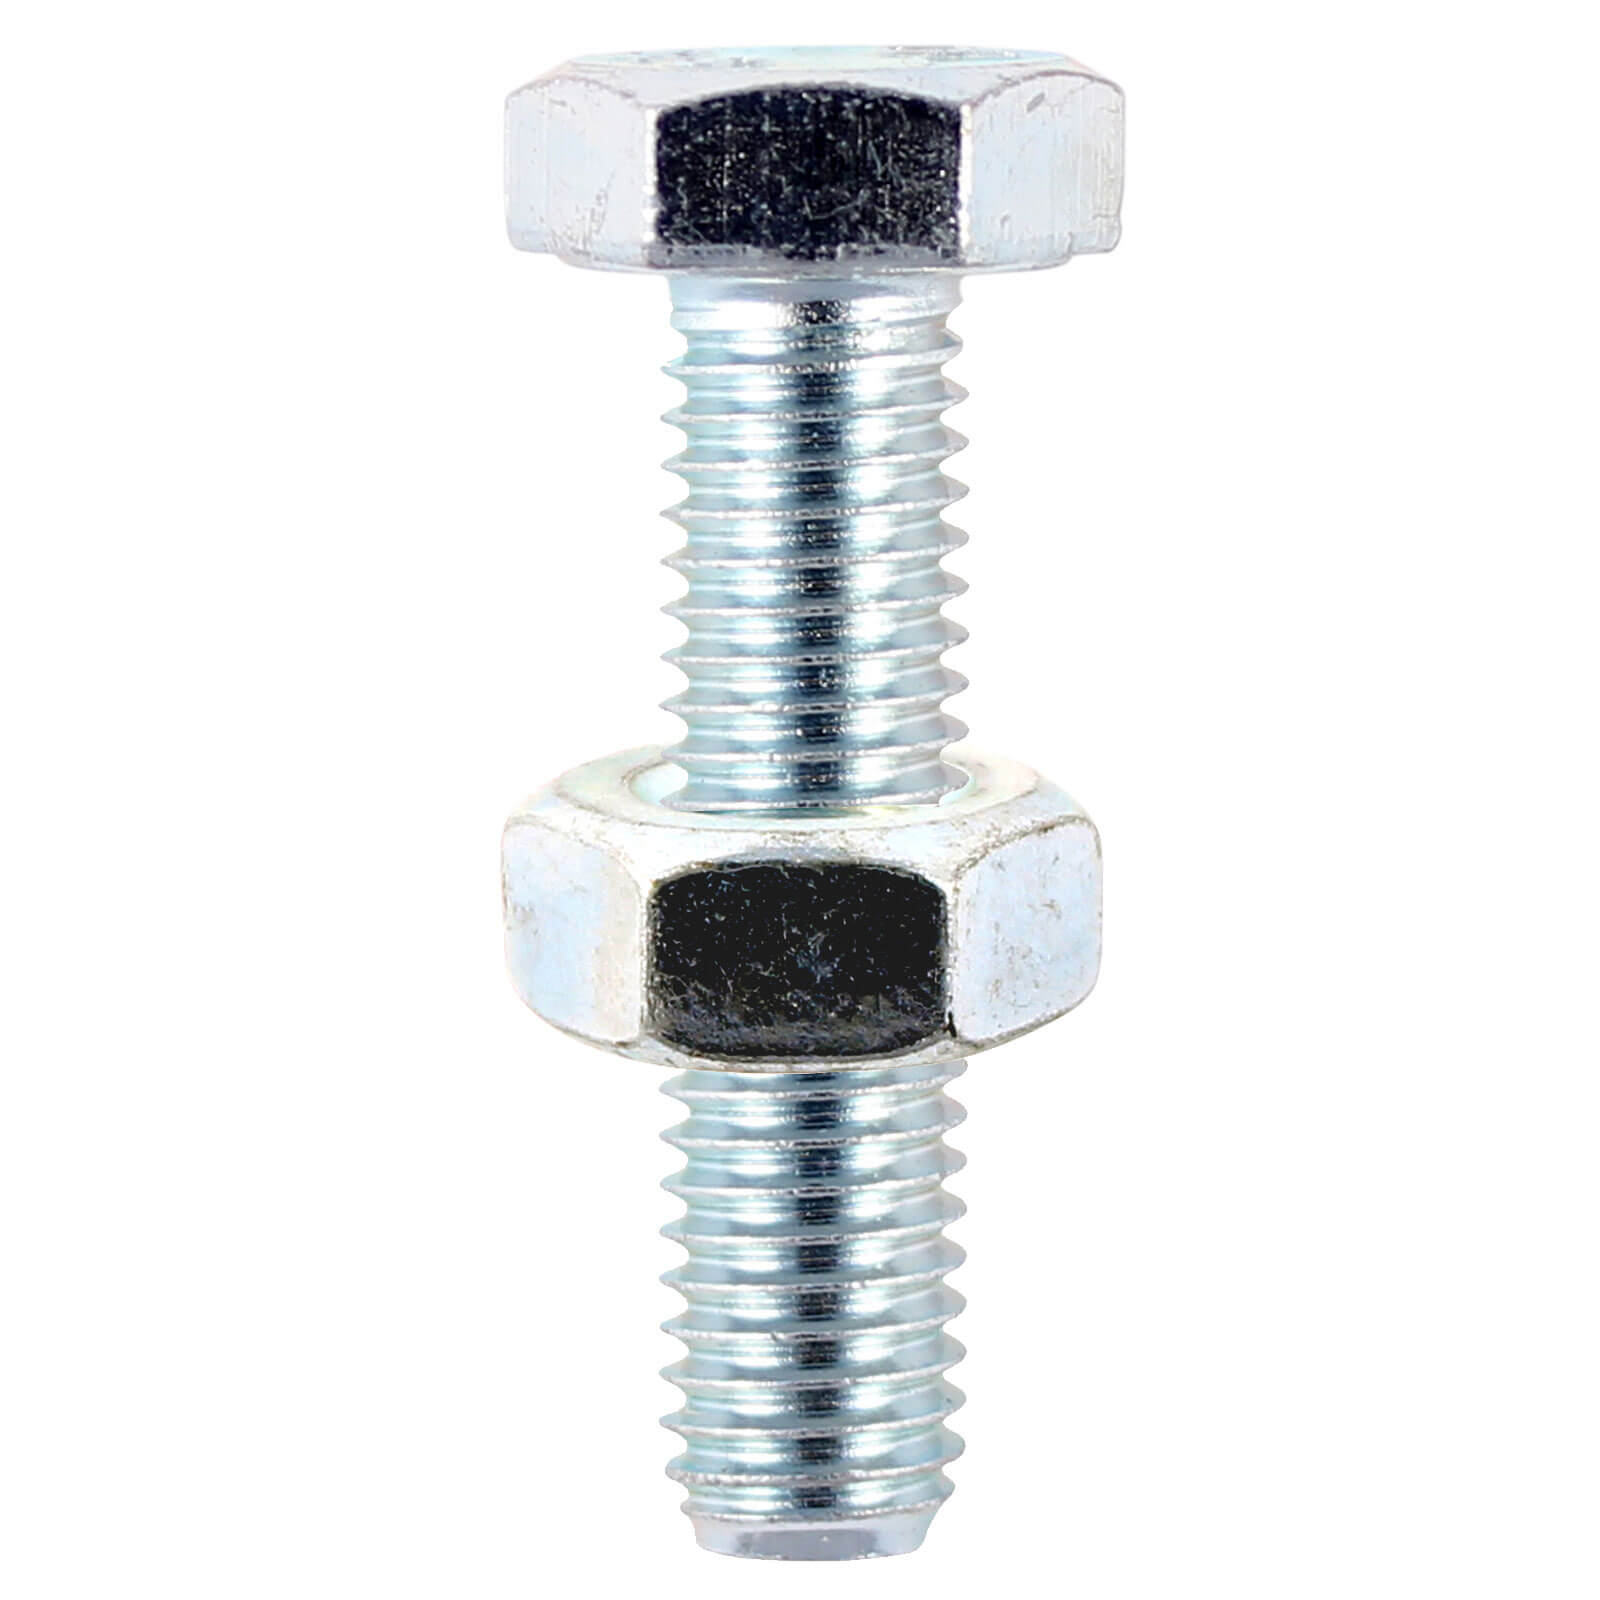 Hexagon Set Screw and Nuts Stainless Steel M12 40mm Pack of 2